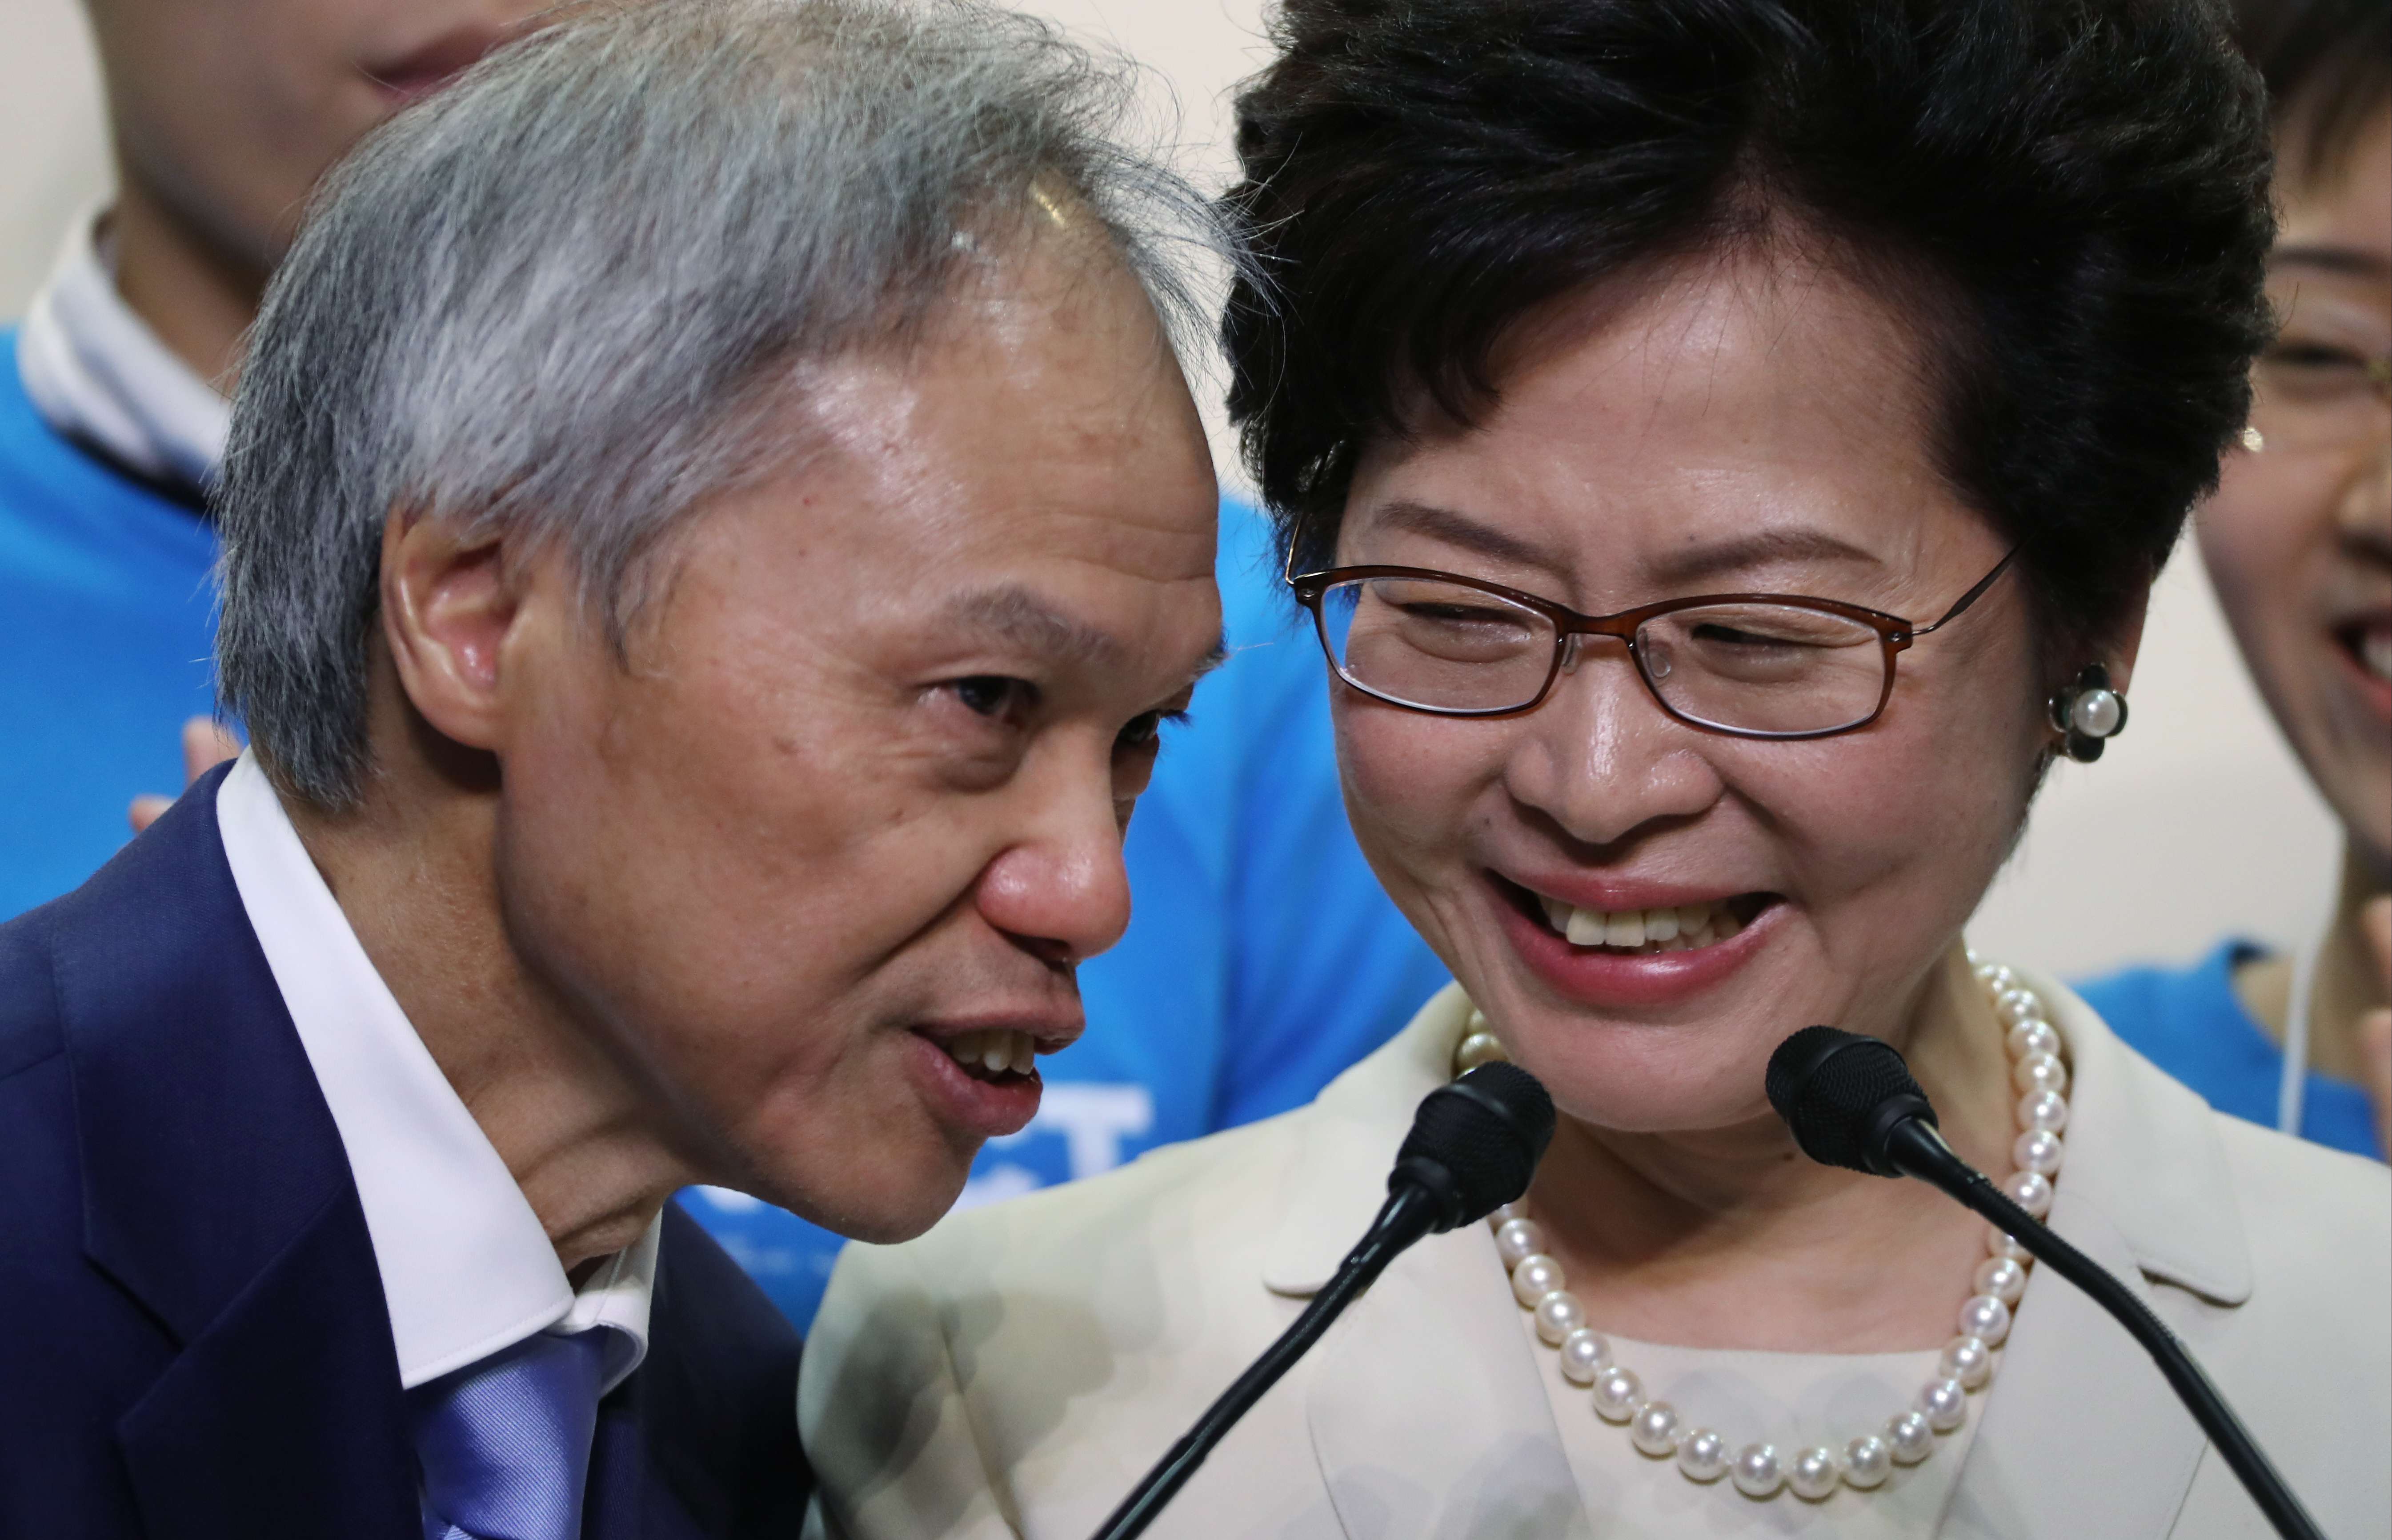 Carrie Lam, with her husband Lam Siu-por, after her chief executive election win at the Hong Kong Convention and Exhibition Centre. Photo: Robert Ng